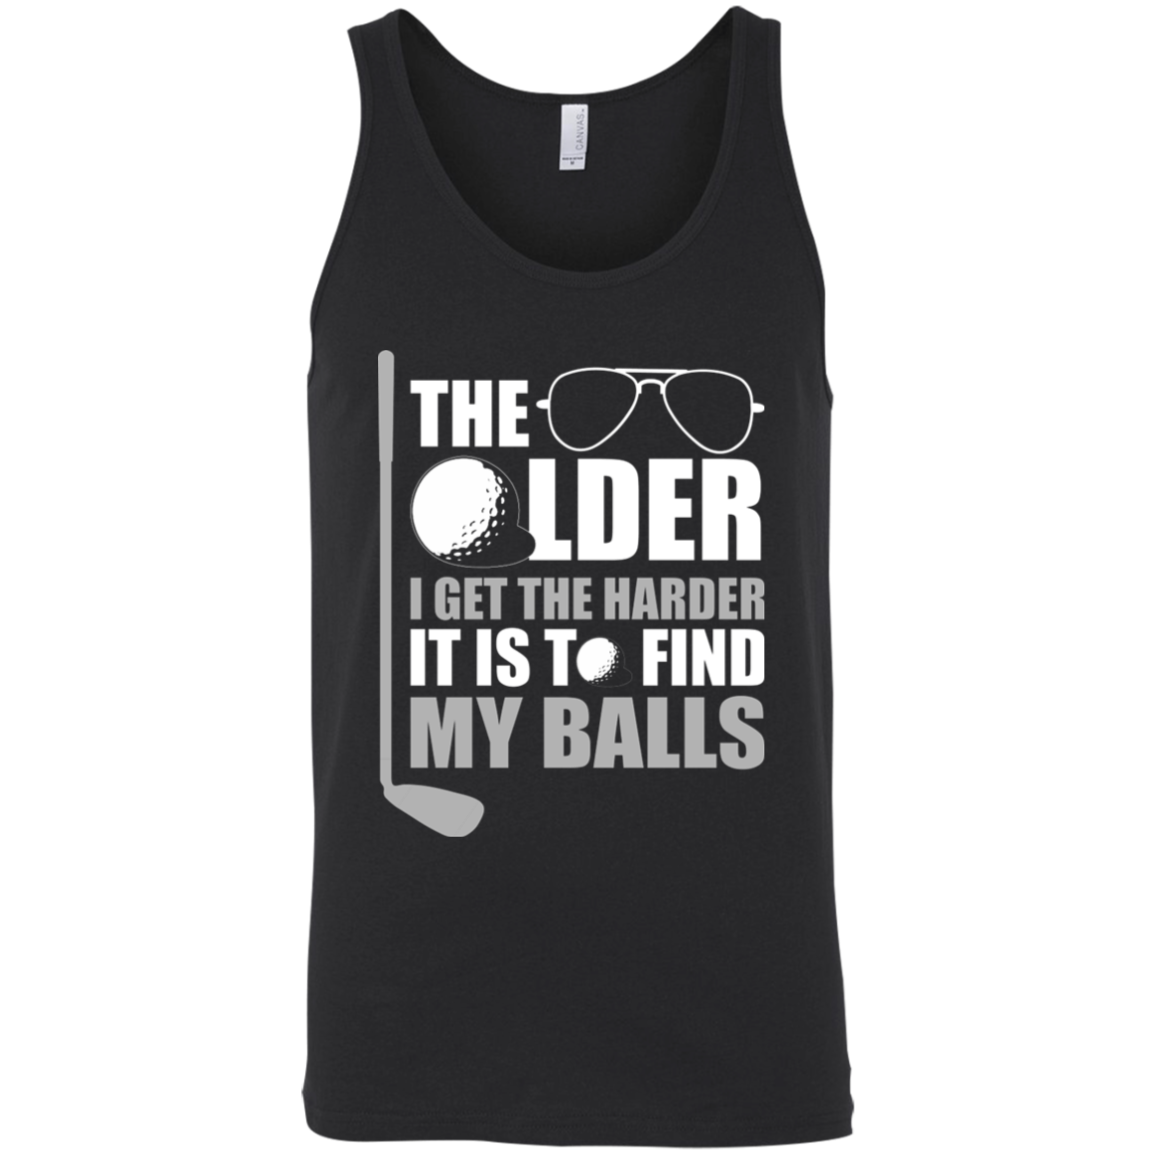 The Older I Get The Harder It Is To Find My Balls Tank Top Apparel - The Beer Lodge